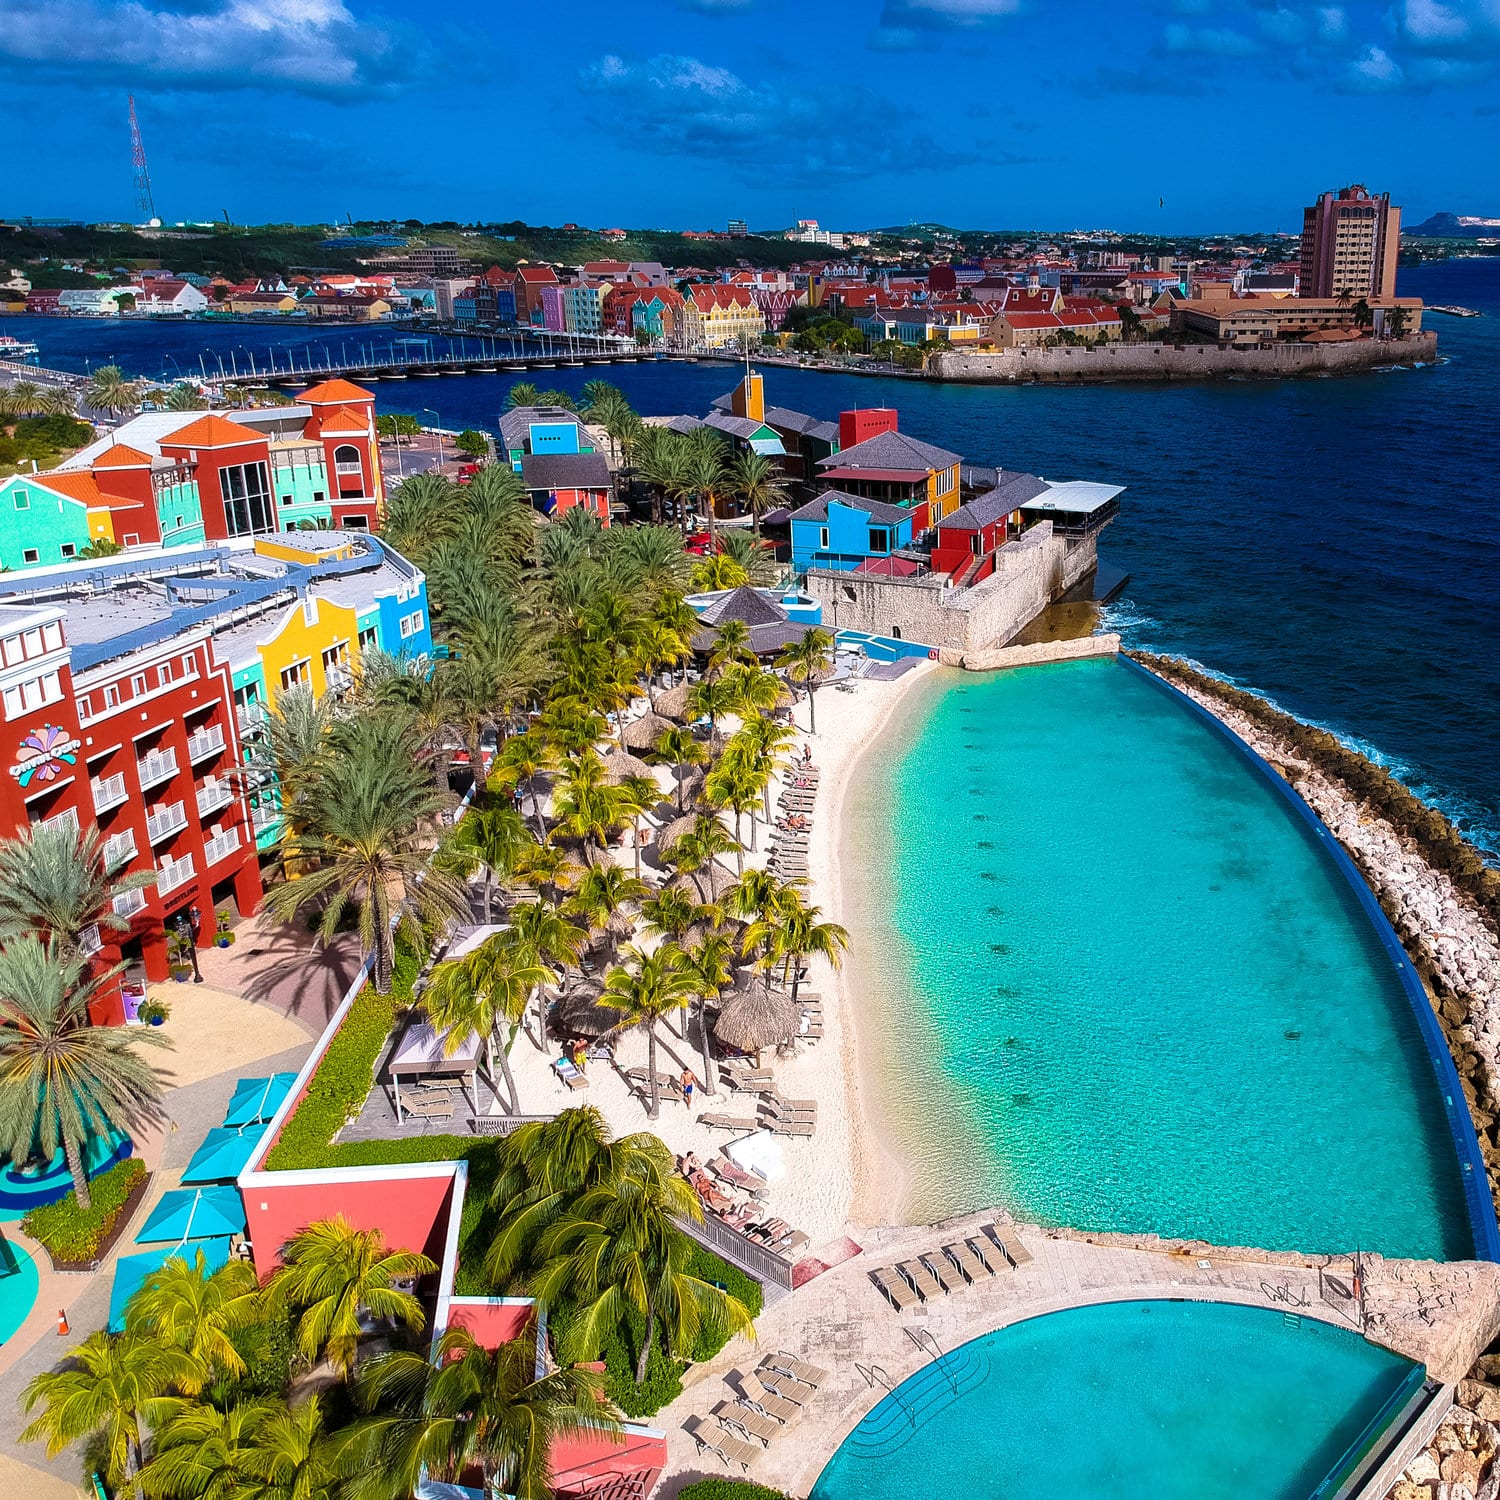 https://www.travelinglifestyle.net/wp-content/uploads/2021/01/Curacao-officially-reopened-tourism-to-all-visitors-on-January-1.jpg